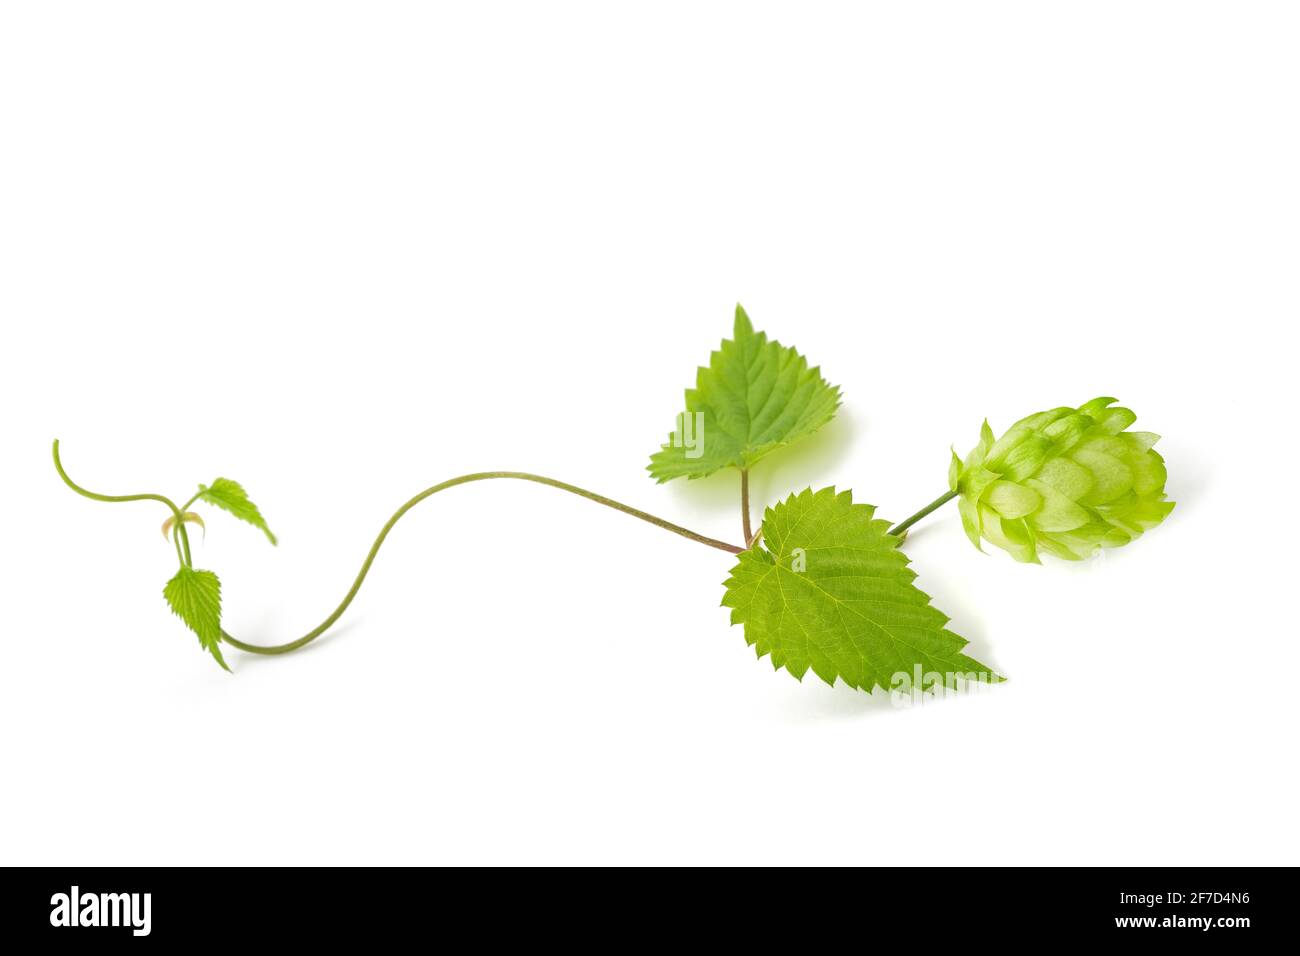 Hop sprig with leaves and cone isolated on white baxkground Stock Photo